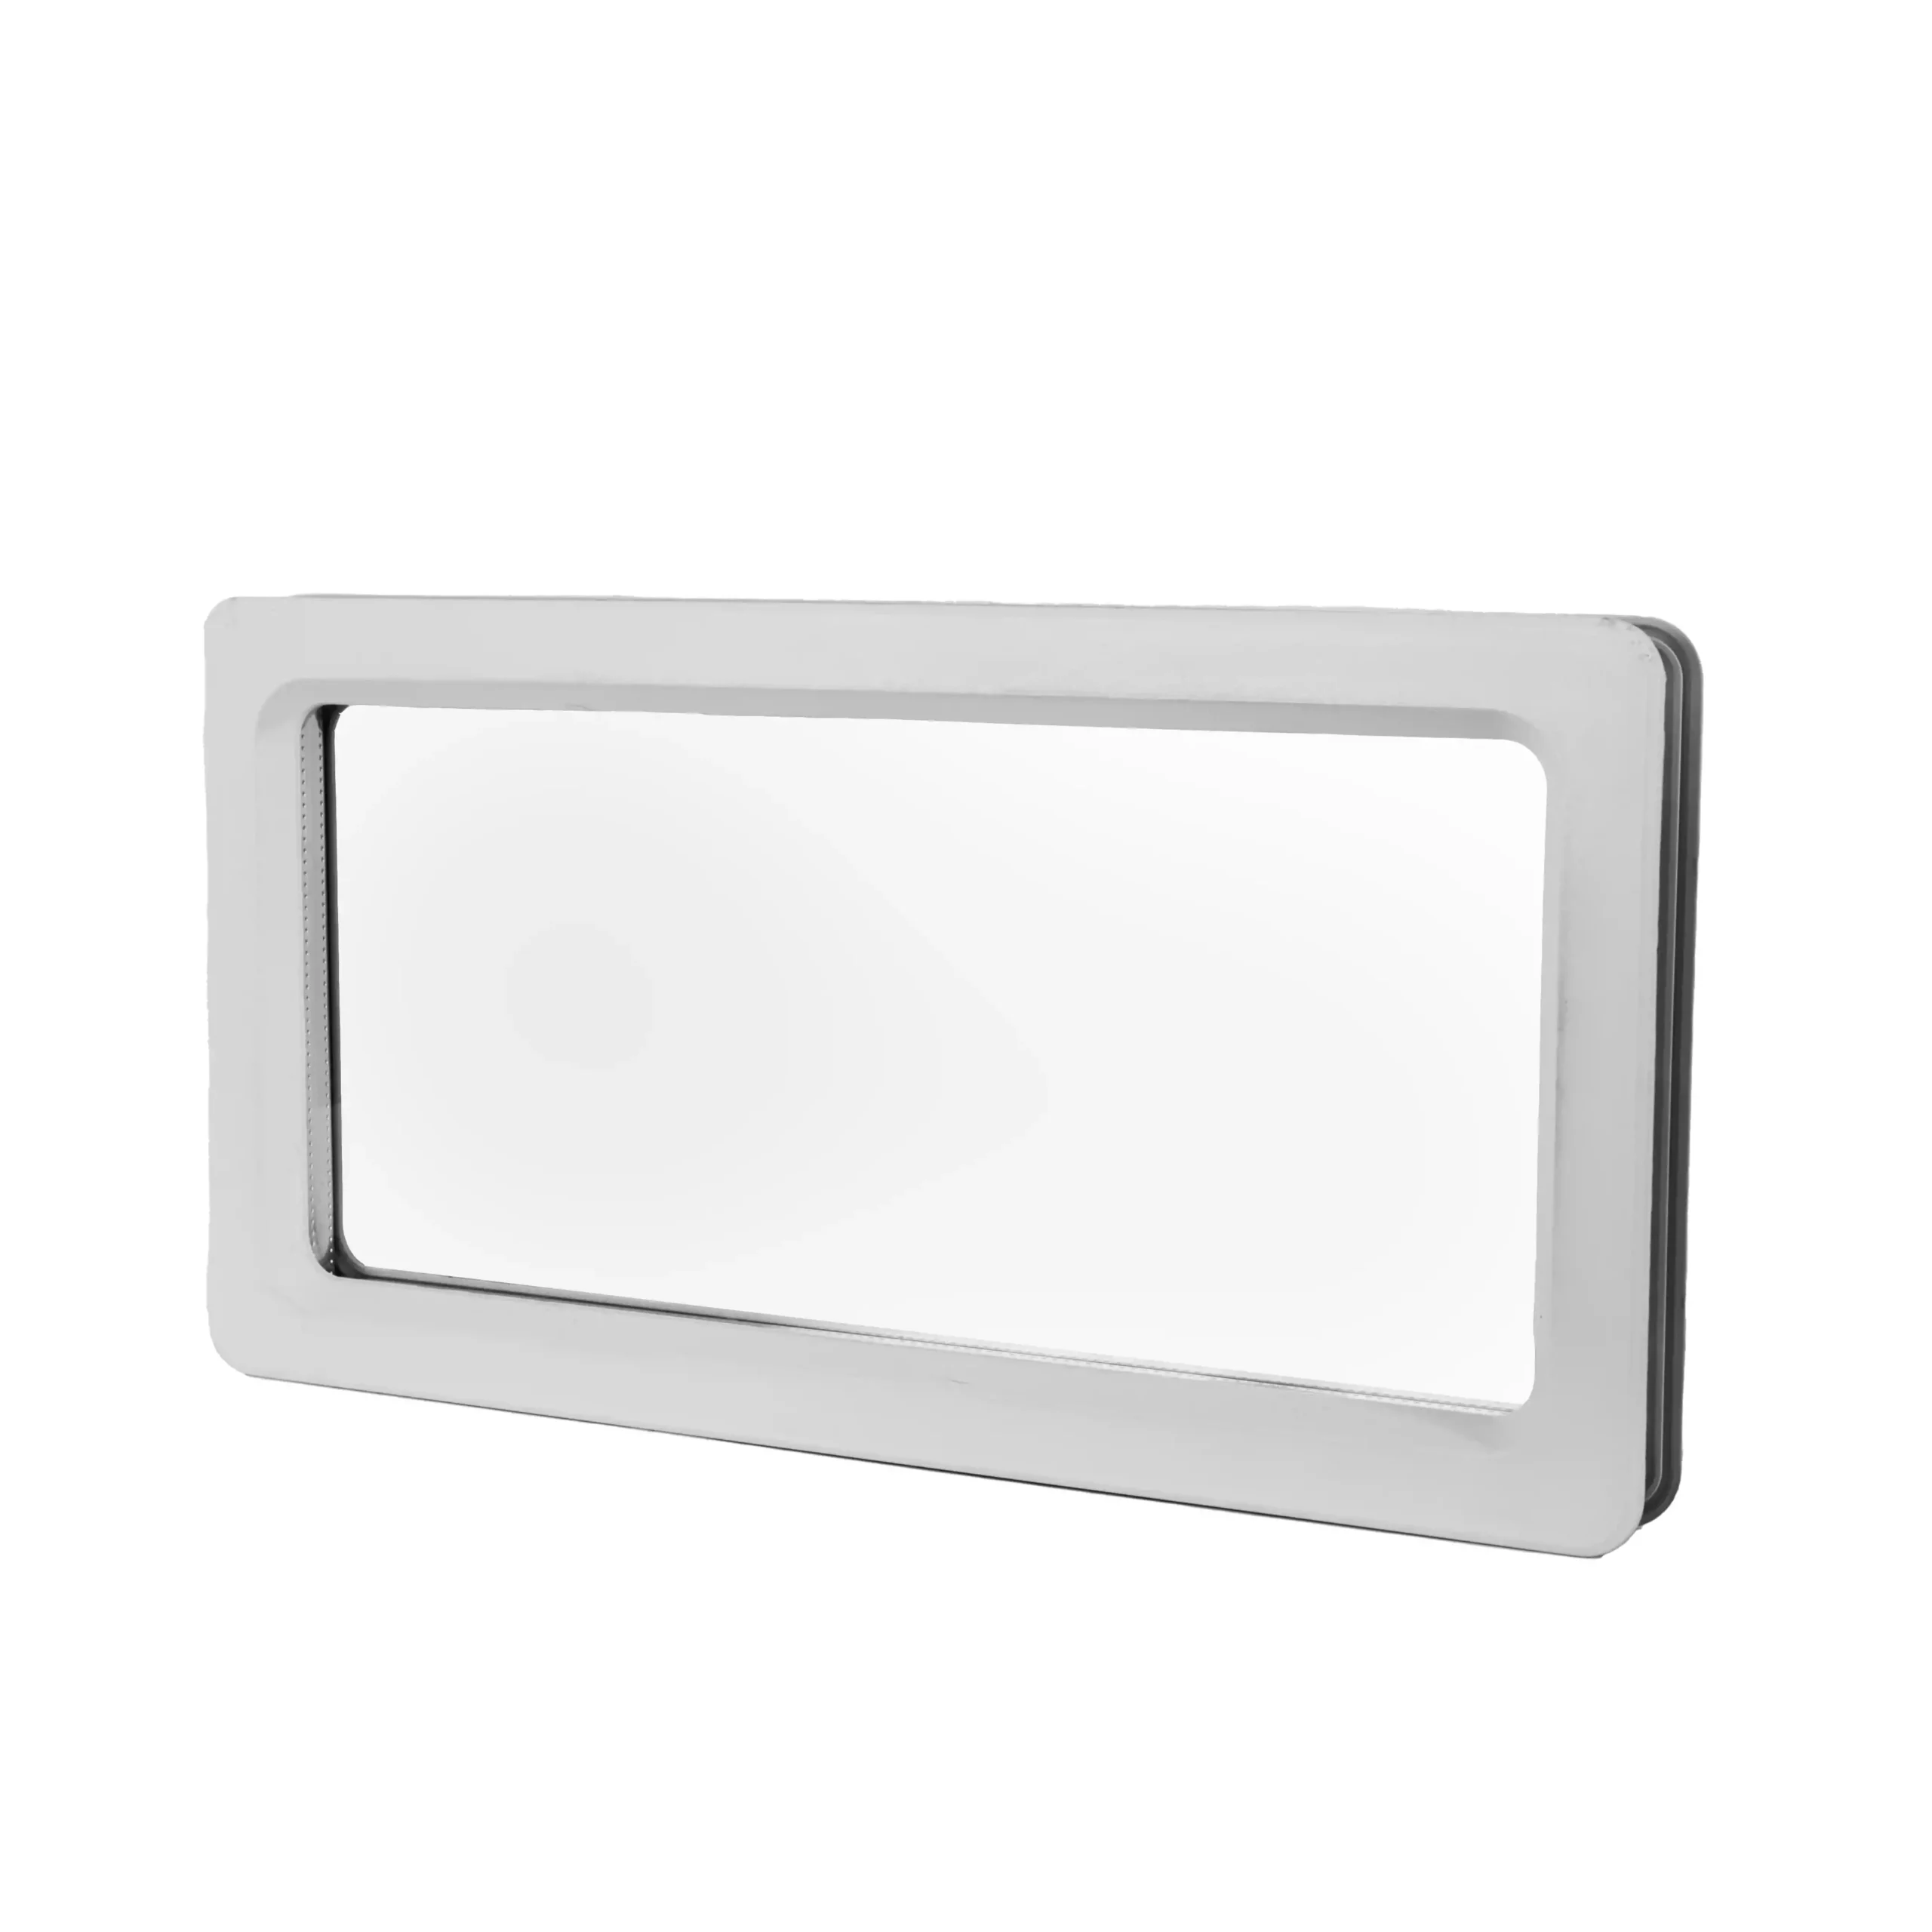 Elton Manufacturing 1224 Window in a white frame